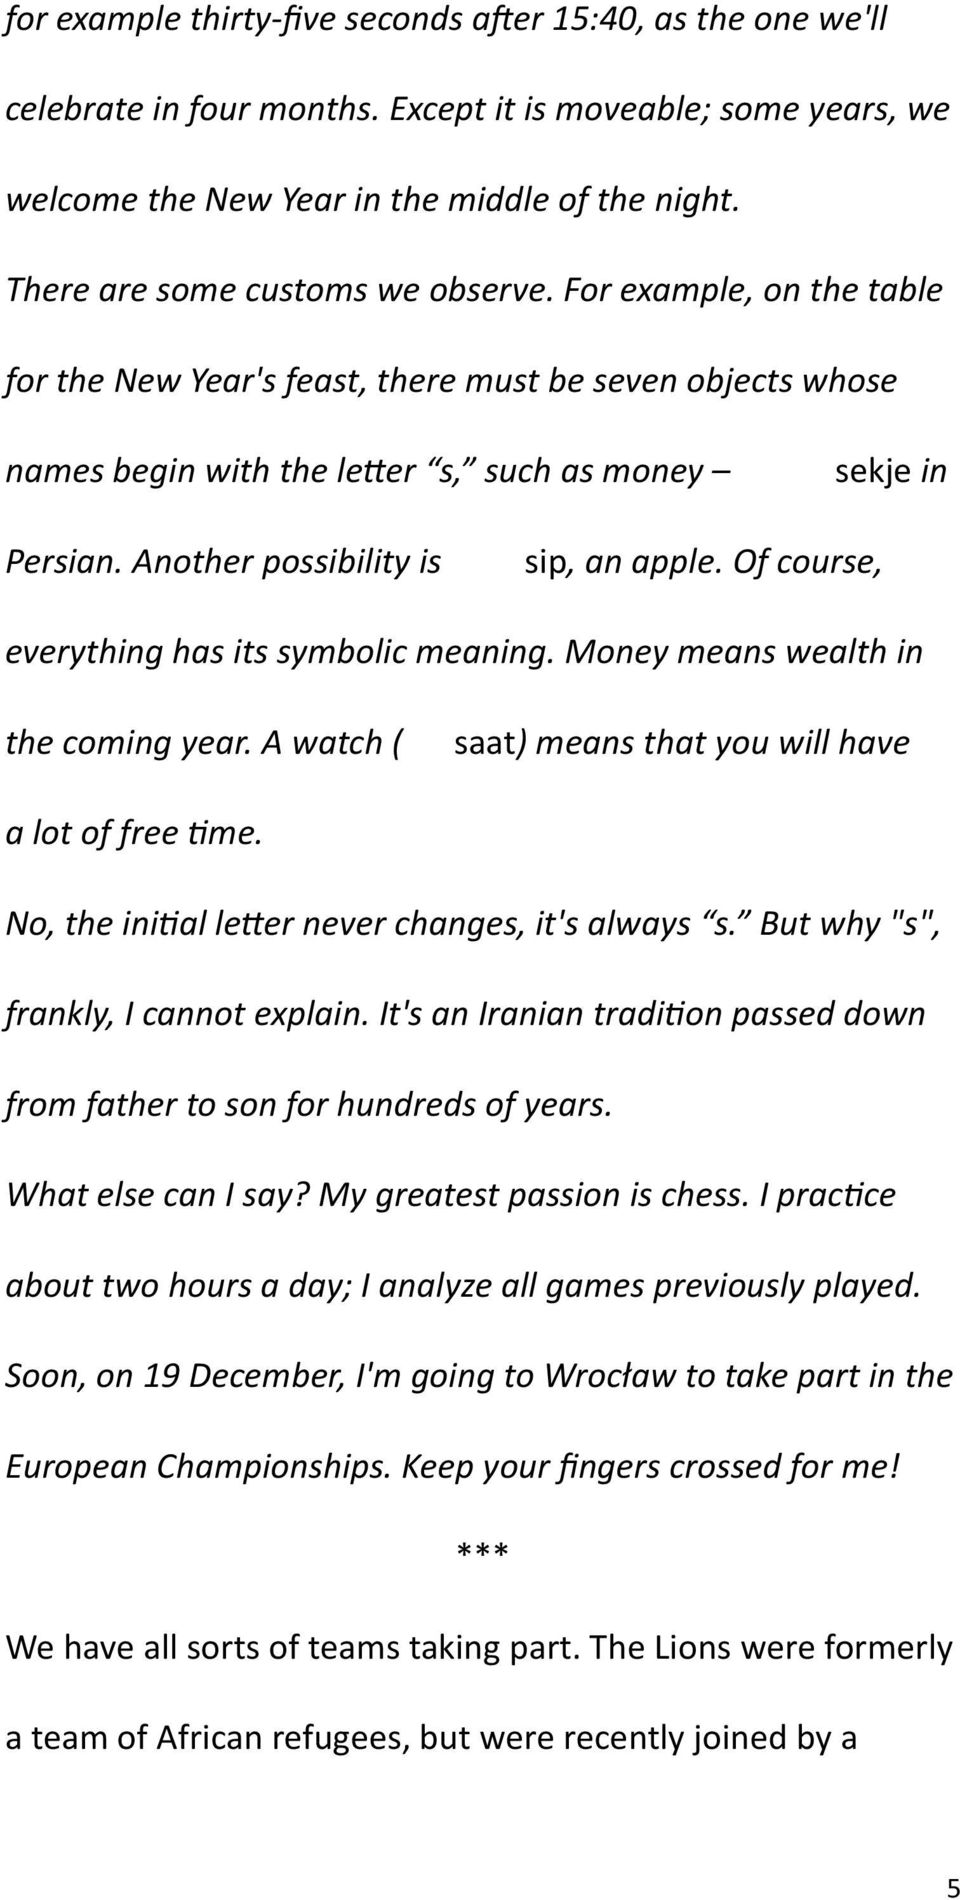 Another possibility is sip, an apple. Of course, everything has its symbolic meaning. Money means wealth in the coming year. A watch ( saat) means that you will have a lot of free time.